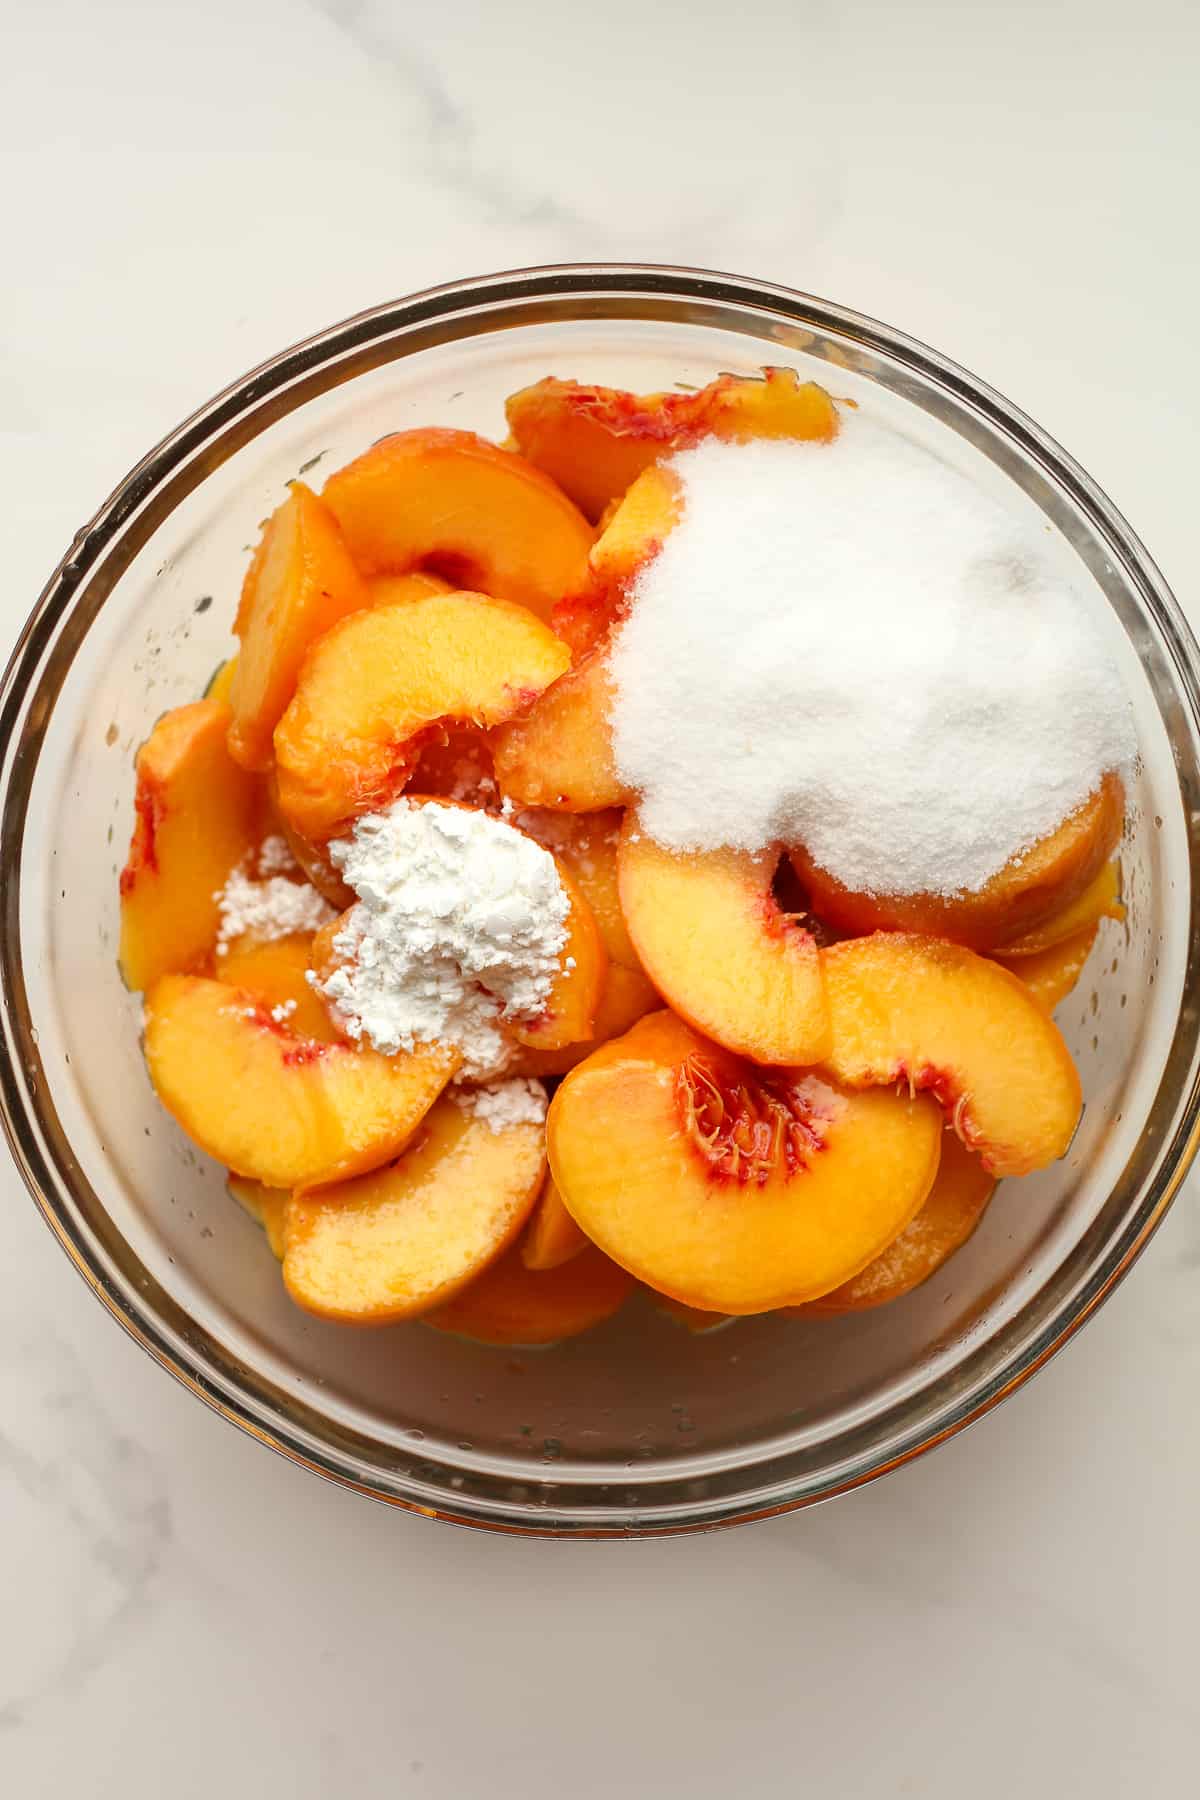 A bowl of sliced peaches plus sugar and other ingredients.